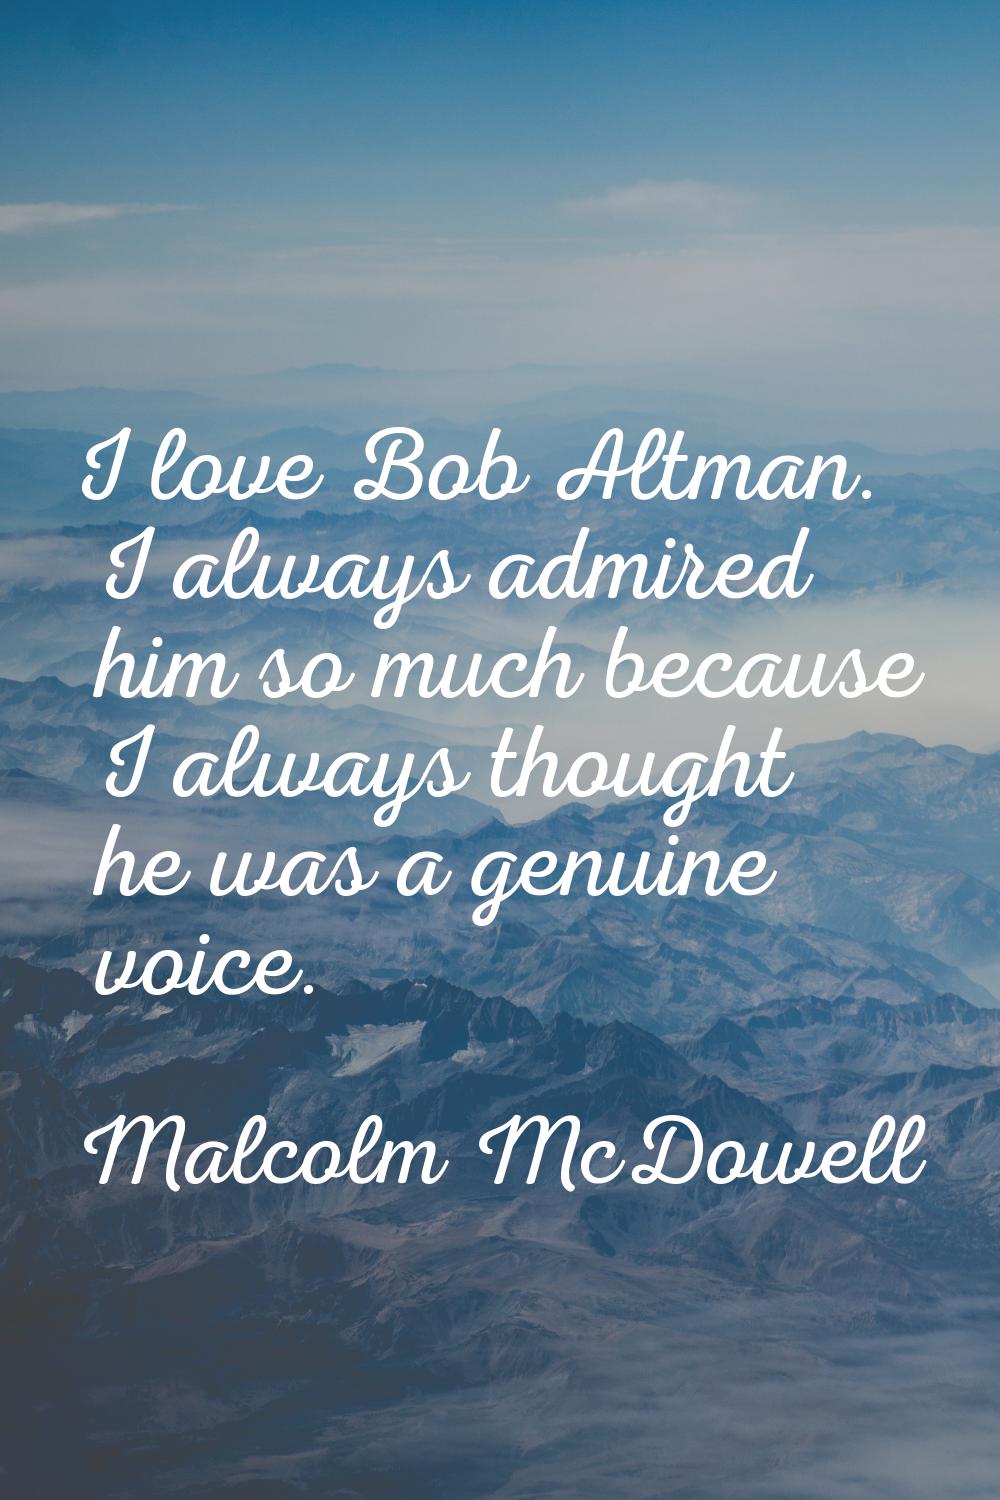 I love Bob Altman. I always admired him so much because I always thought he was a genuine voice.